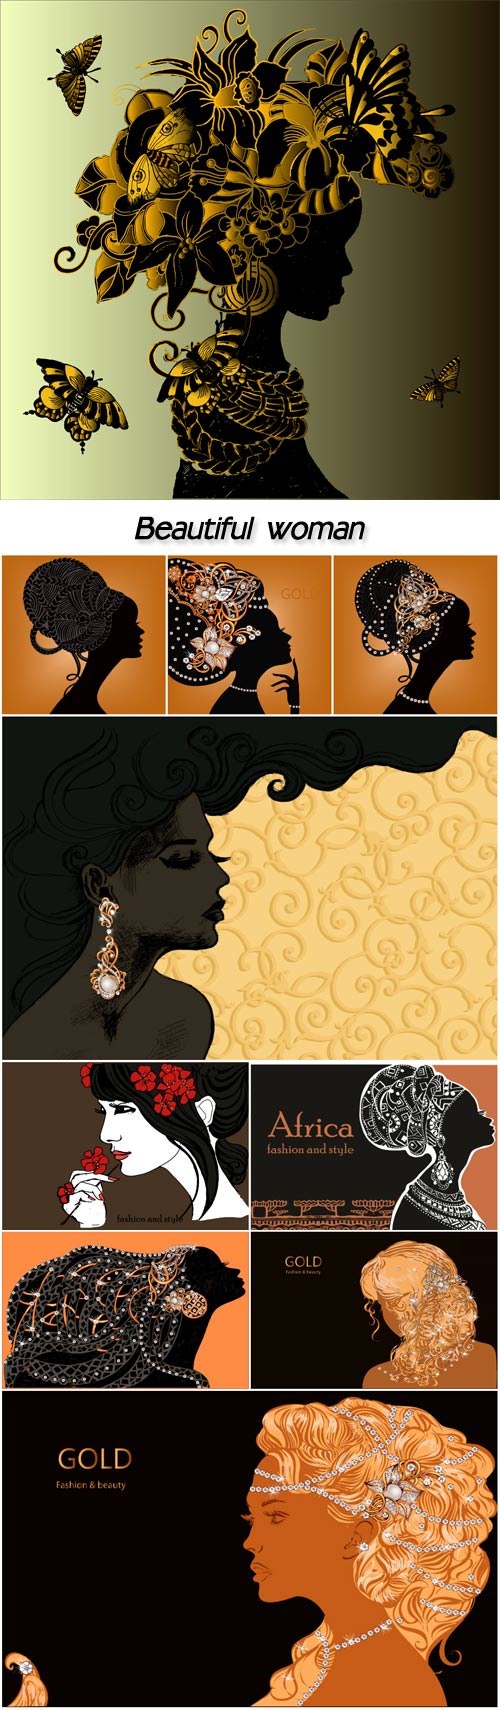 Silhouette of beautiful woman with flowers in her hair, woman with jewelry